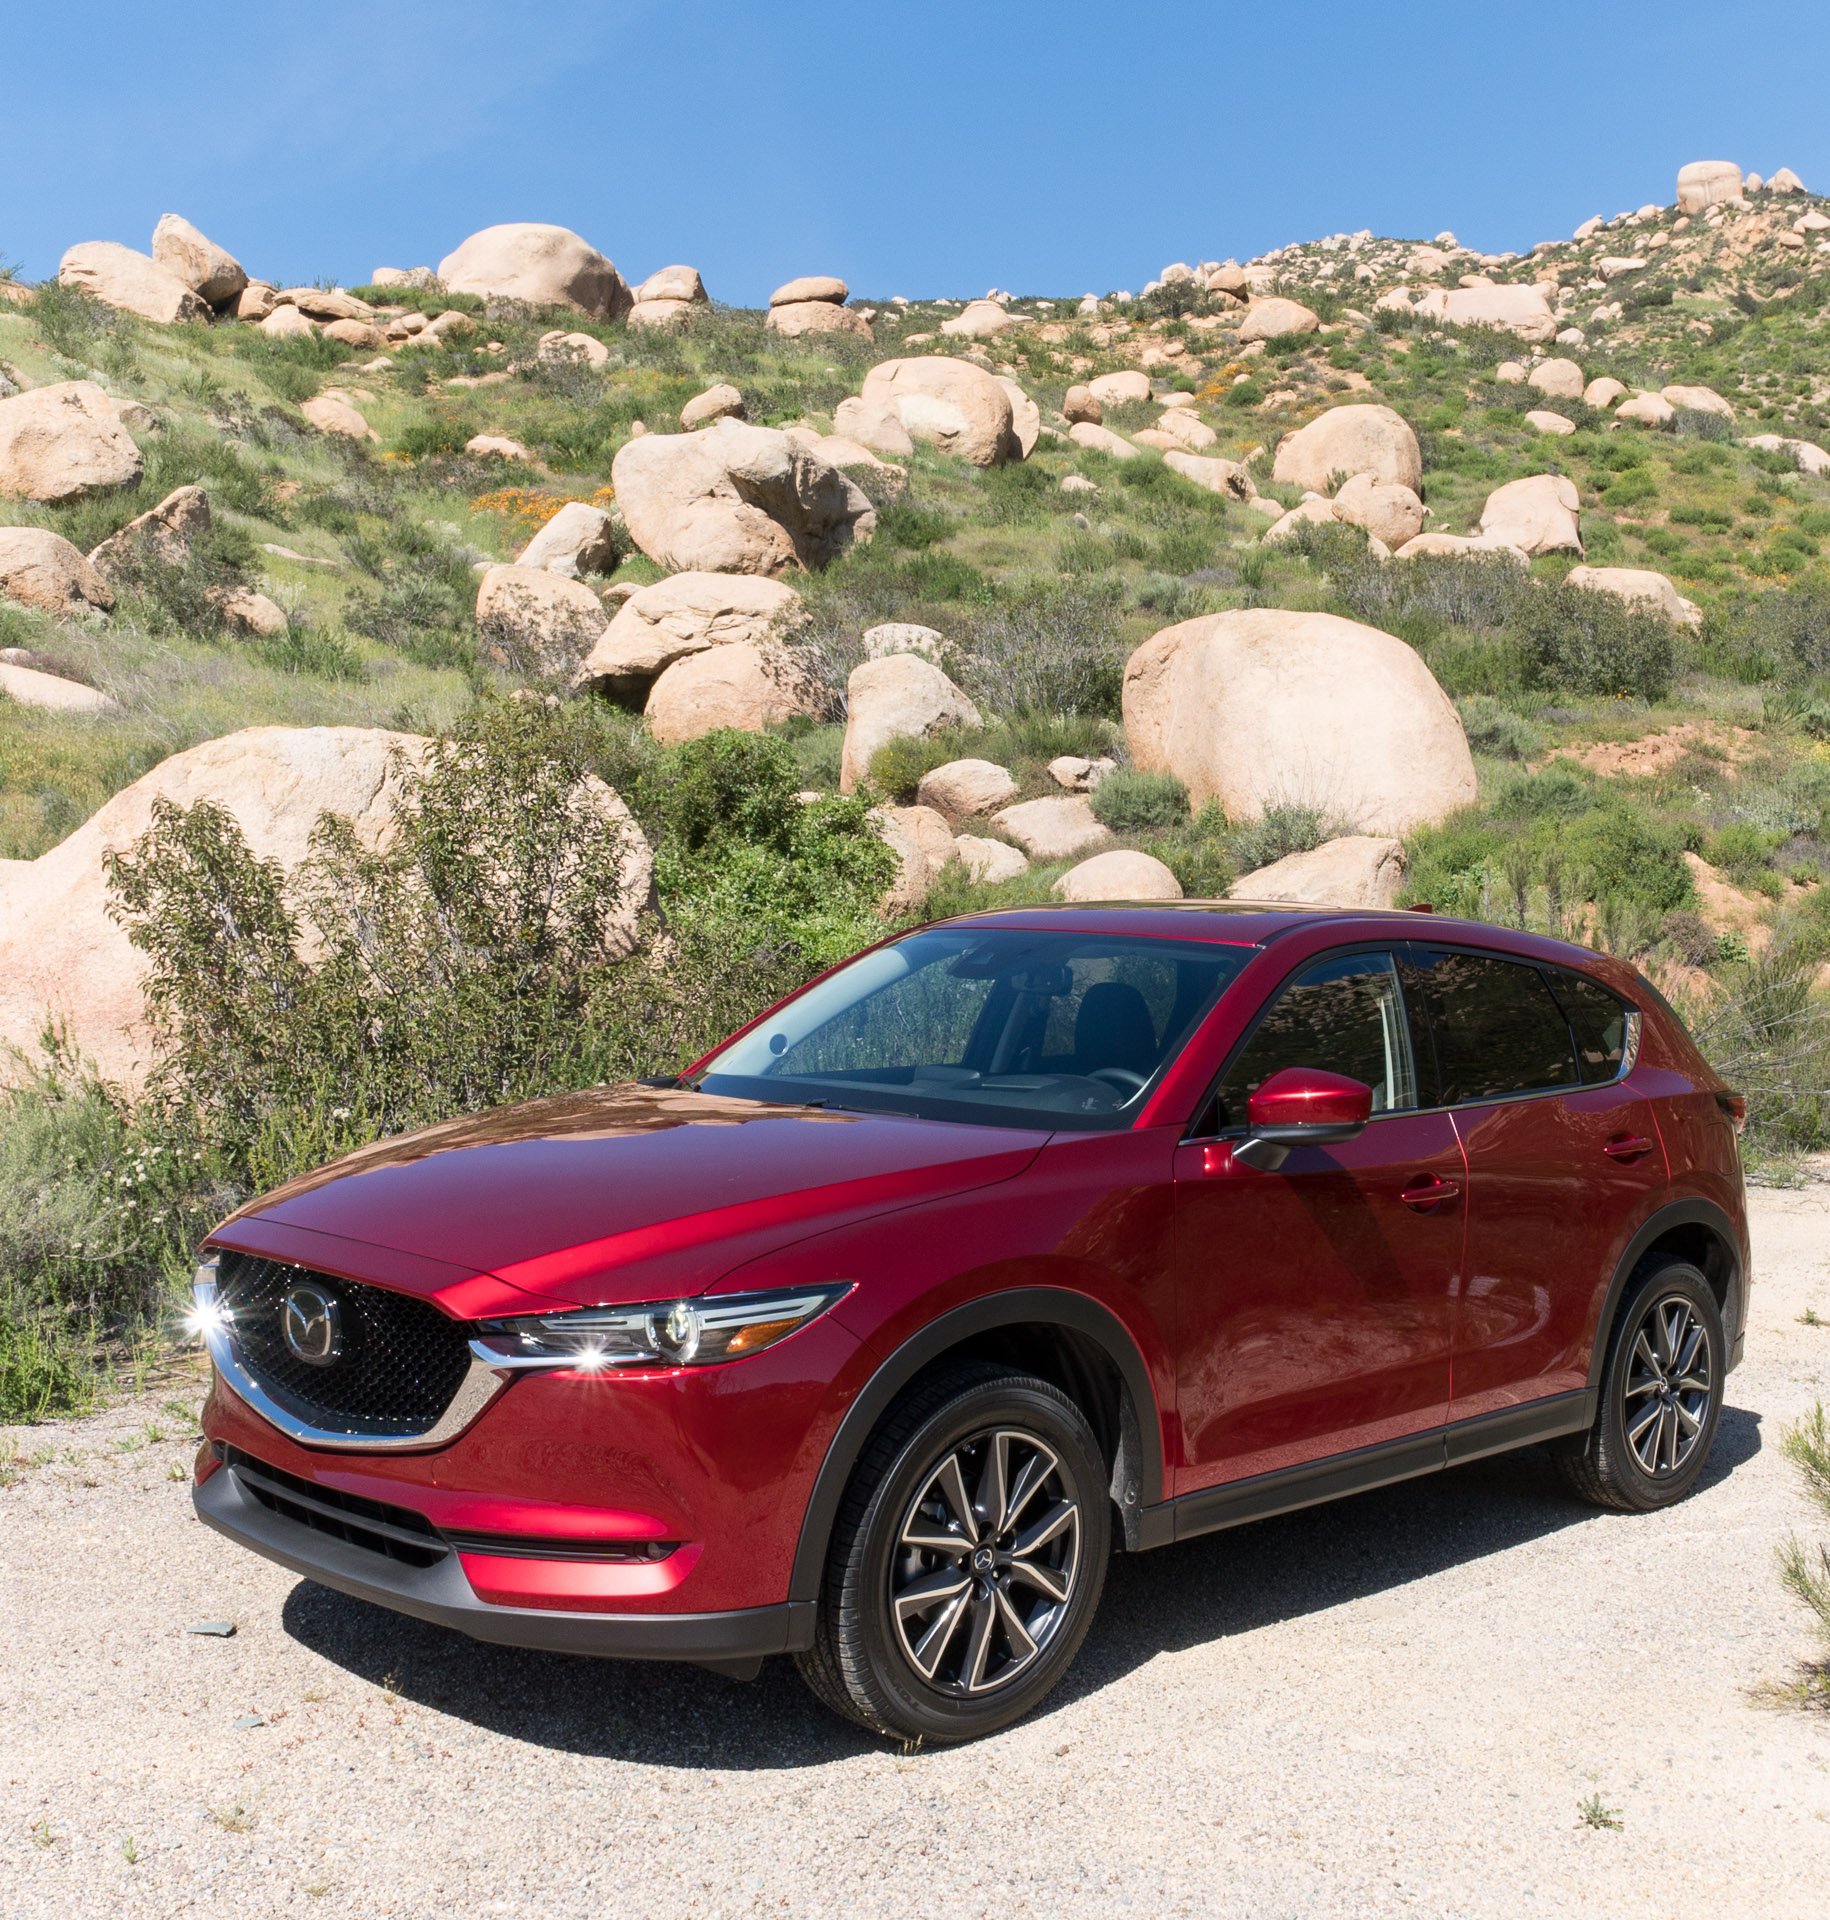 2017 Mazda CX5 Grand Touring First Drive Review 95 Octane